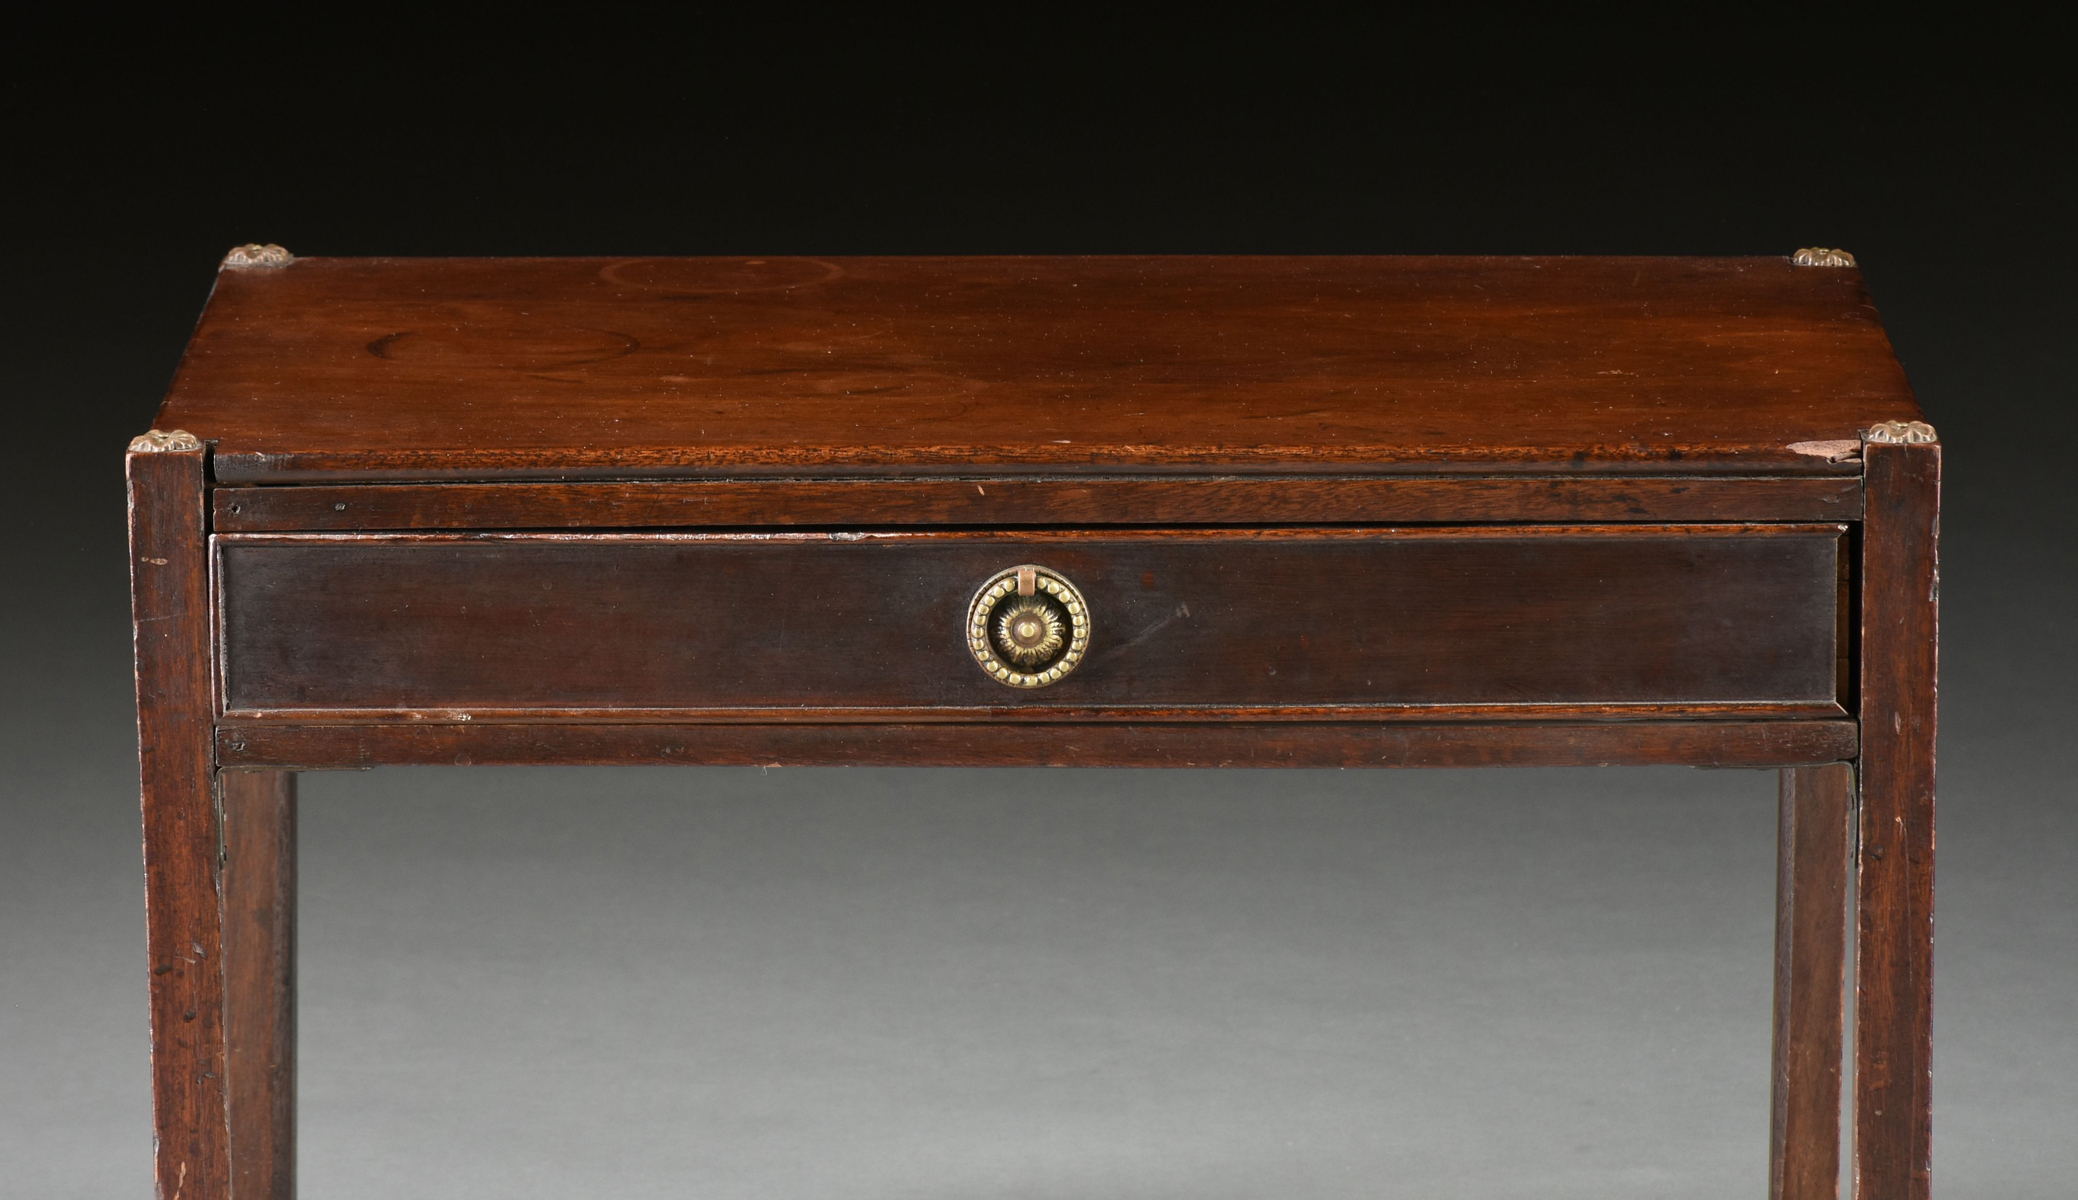 A GEORGE III MAHOGANY LOW SIDE TABLE, LATE 18TH/EARLY 19TH CENTURY, the rectangular top above a - Image 2 of 6